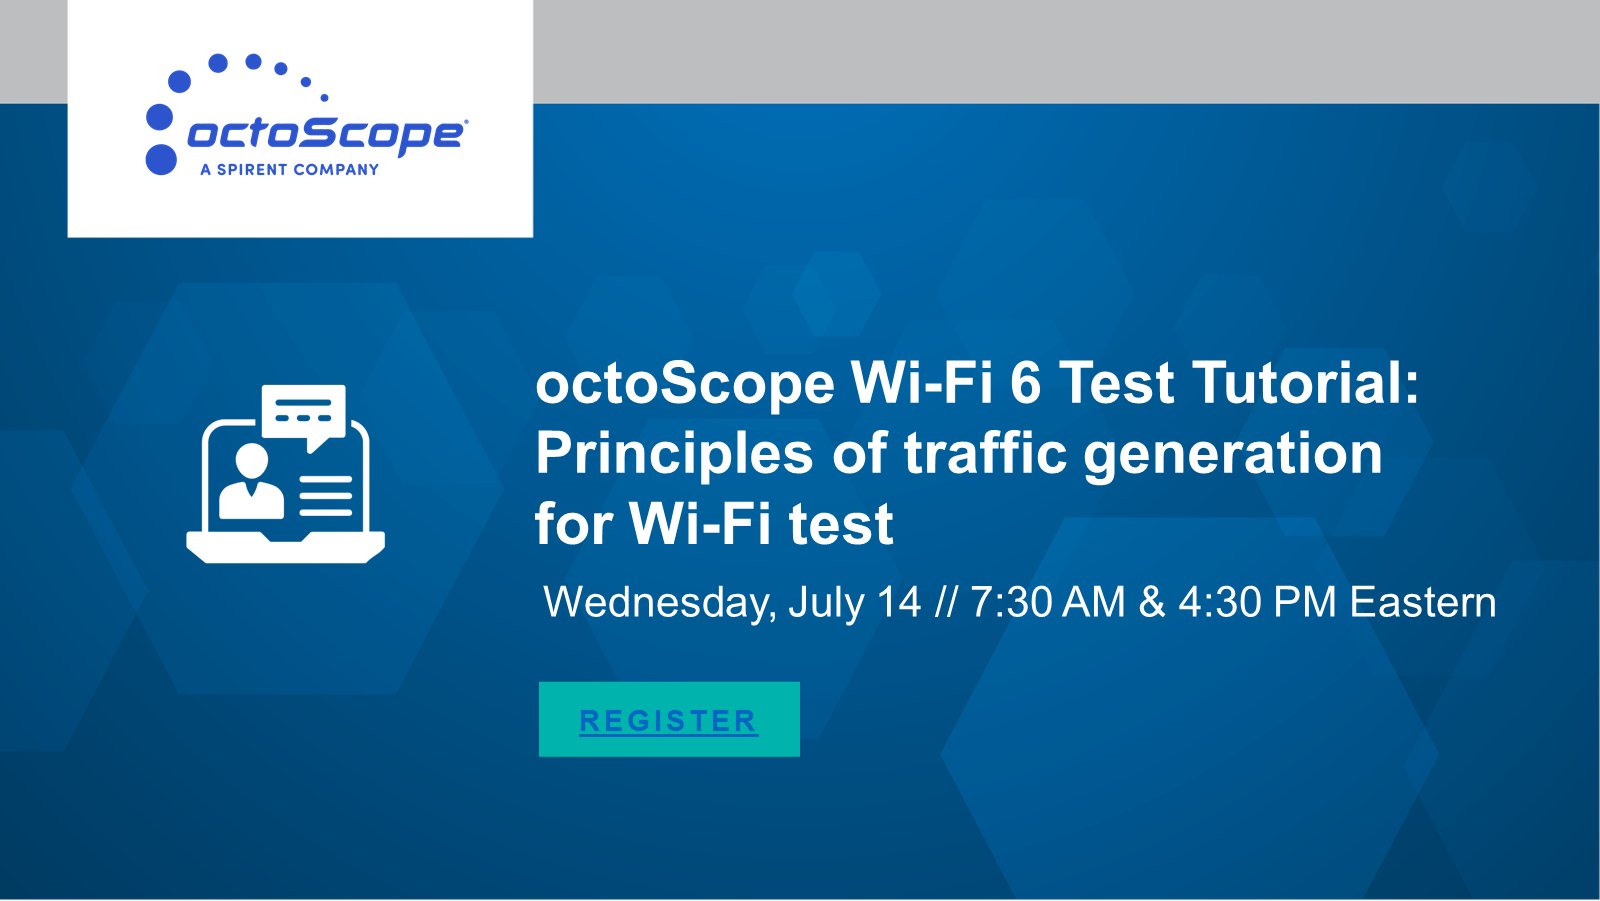 octoScope is now Spirent on Twitter: "On Wednesday 7/14 will present it's next #WiFi6 tutorial on Principles of traffic generation for Wi-Fi test. To facilitate live participation in any zone,